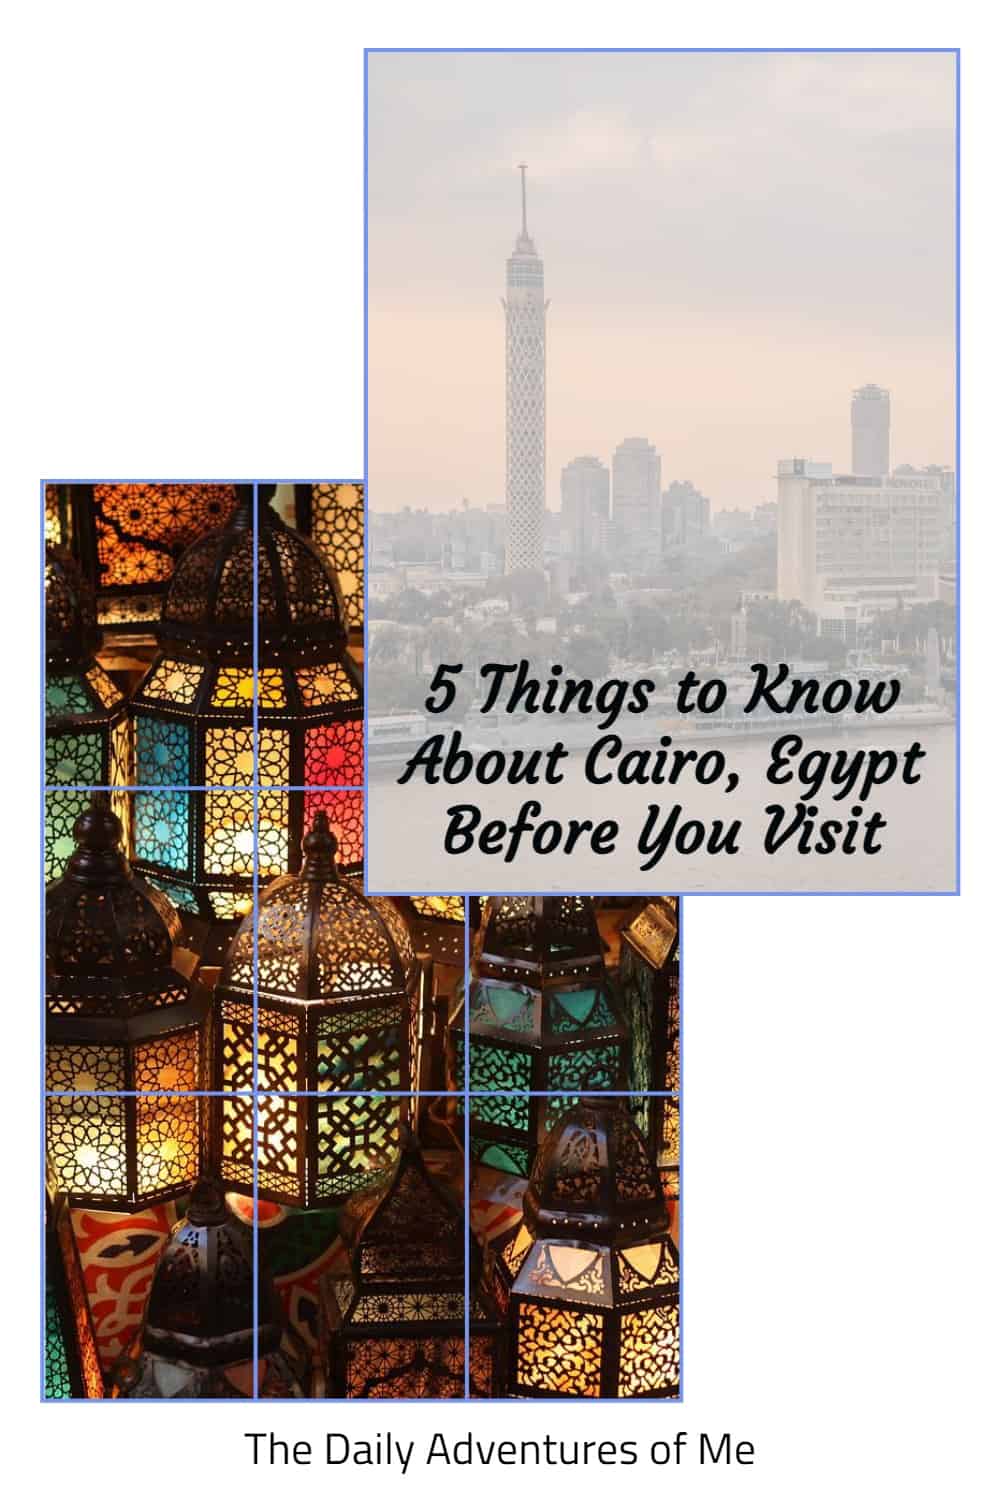 Read on to set your expectations for your trip to Cairo, Egypt. #Egypttravel #TraveltoEgypt #CairoEgypt